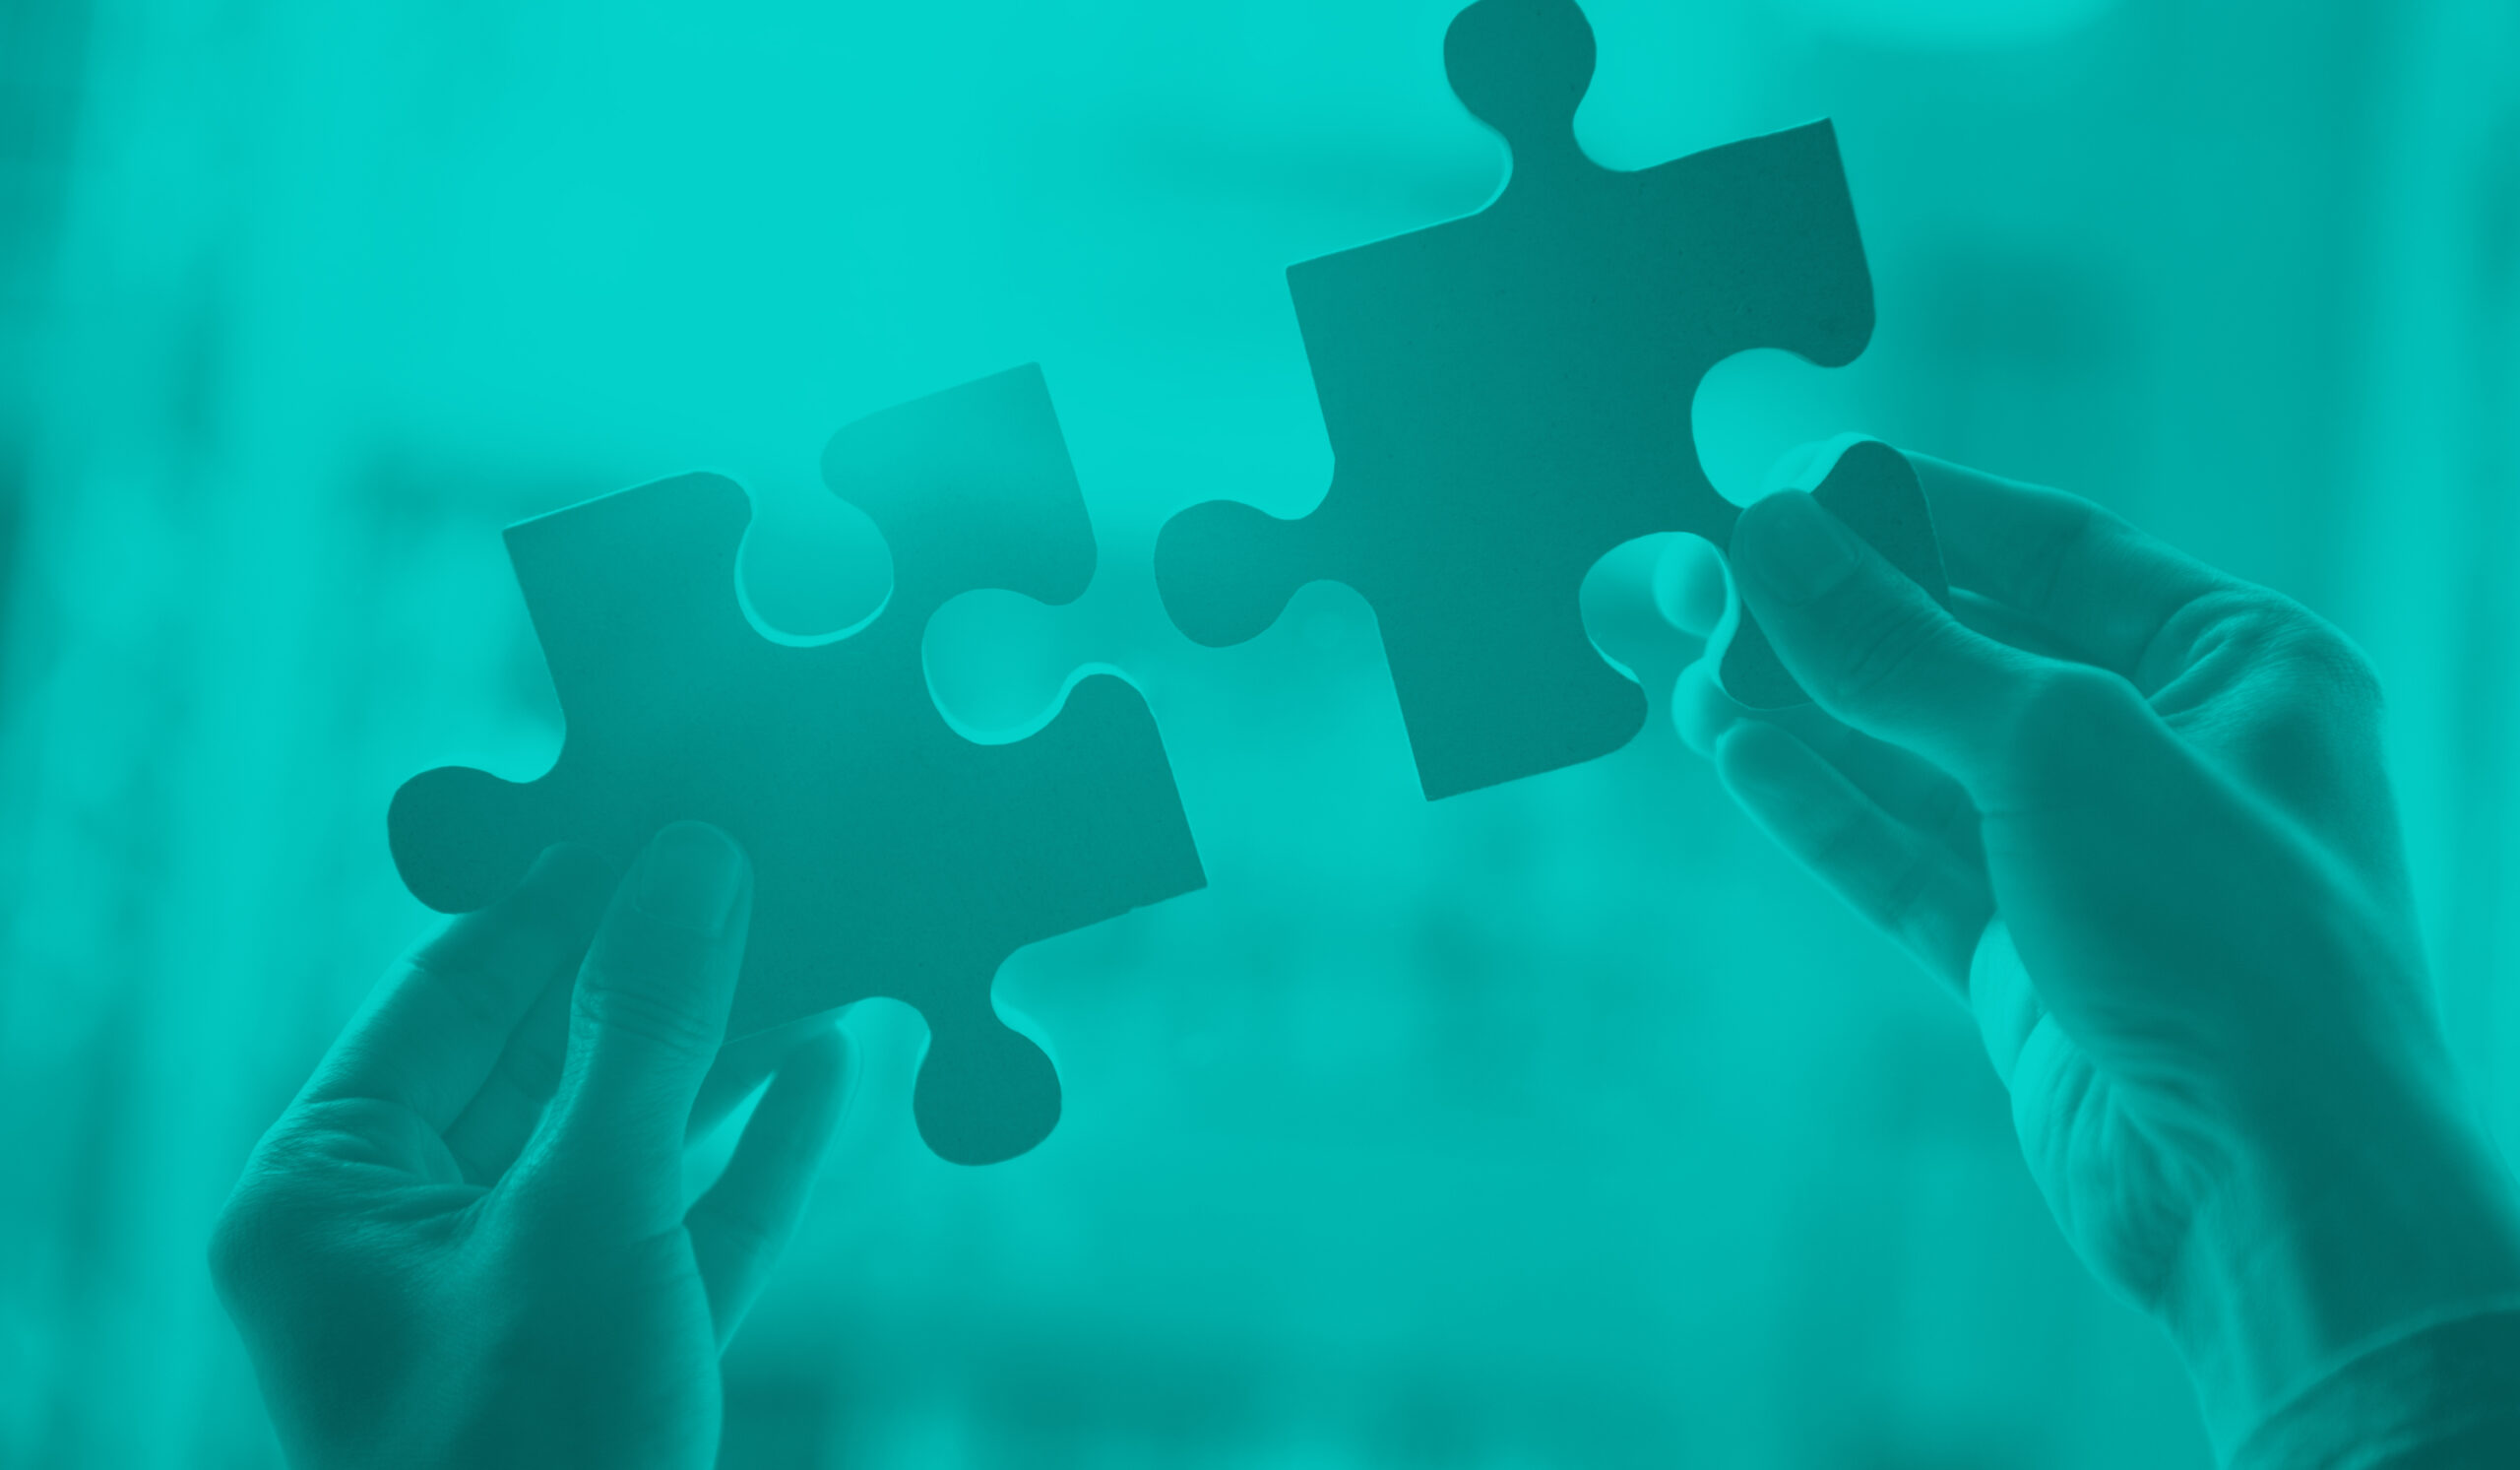 Blog feature photo of human hands holding puzzle pieces that will fit together abstractly representing Omnichannel marketing that integrates together seamlessly